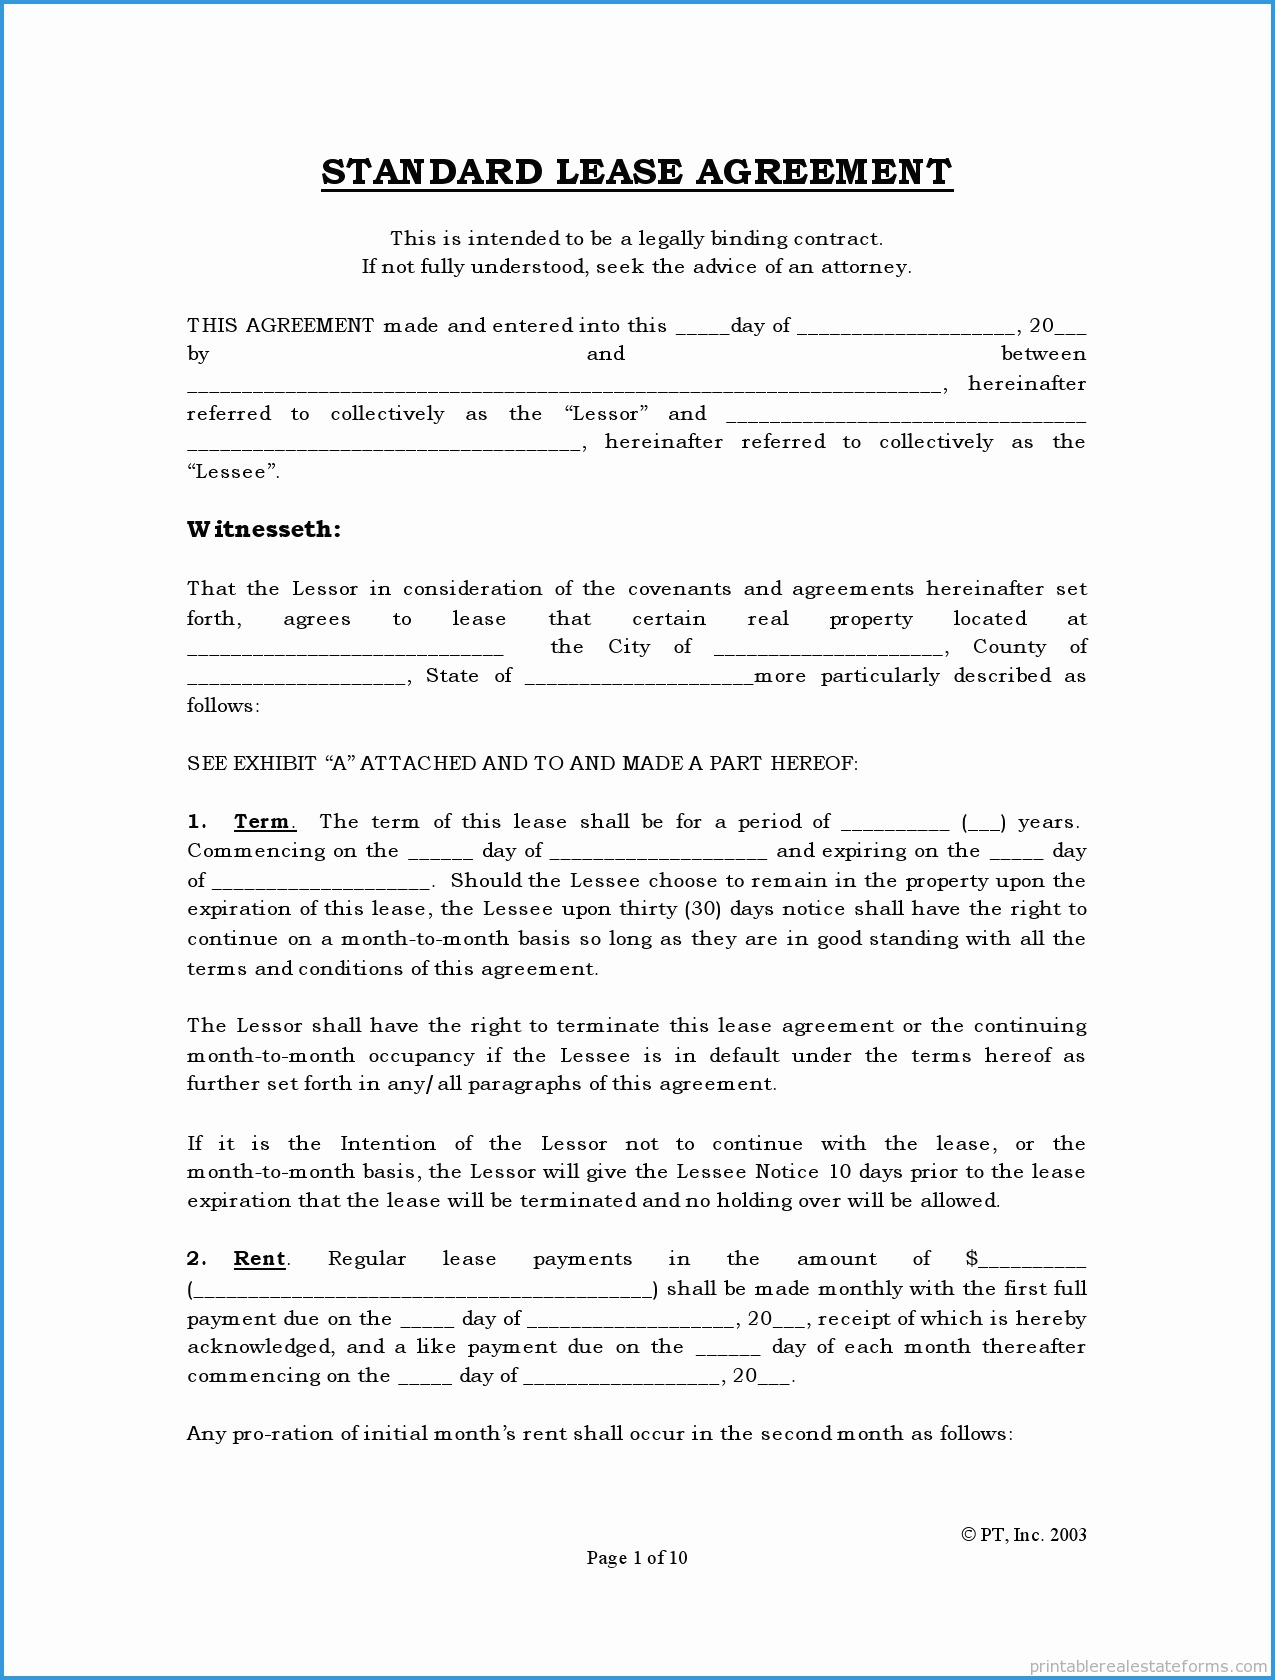 Residential Lease Agreement Doc Free Florida Residential Lease Agreement Template Amazing Free